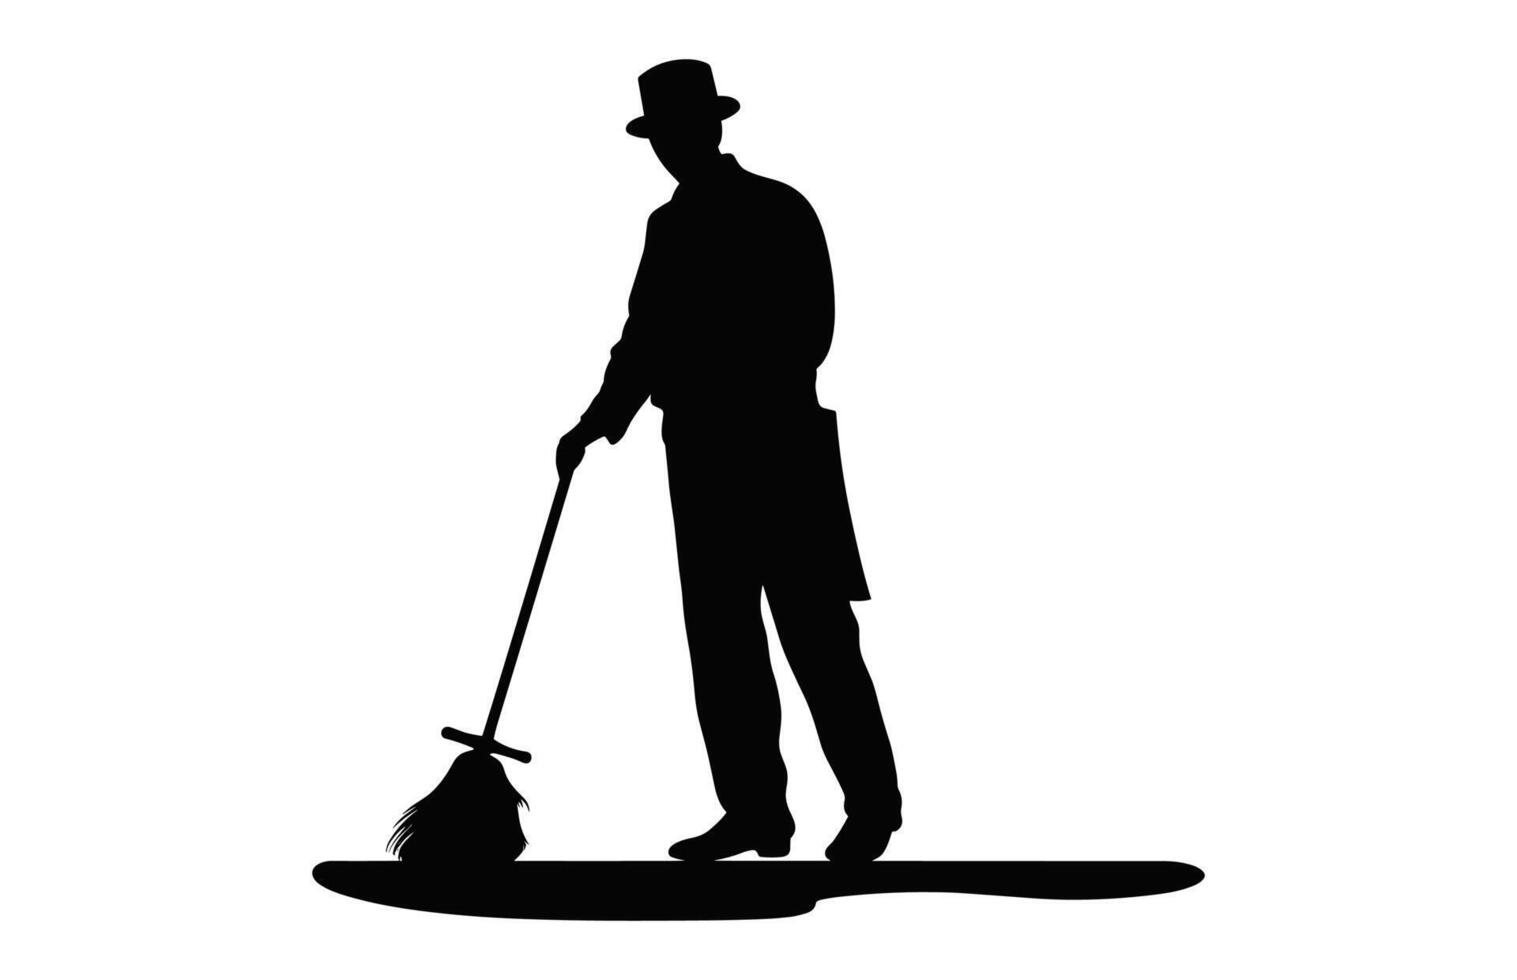 Cleaning Man Silhouette isolated on a white background, Sweeper boy Black and White Vector, Male Cleaner black Clipart vector